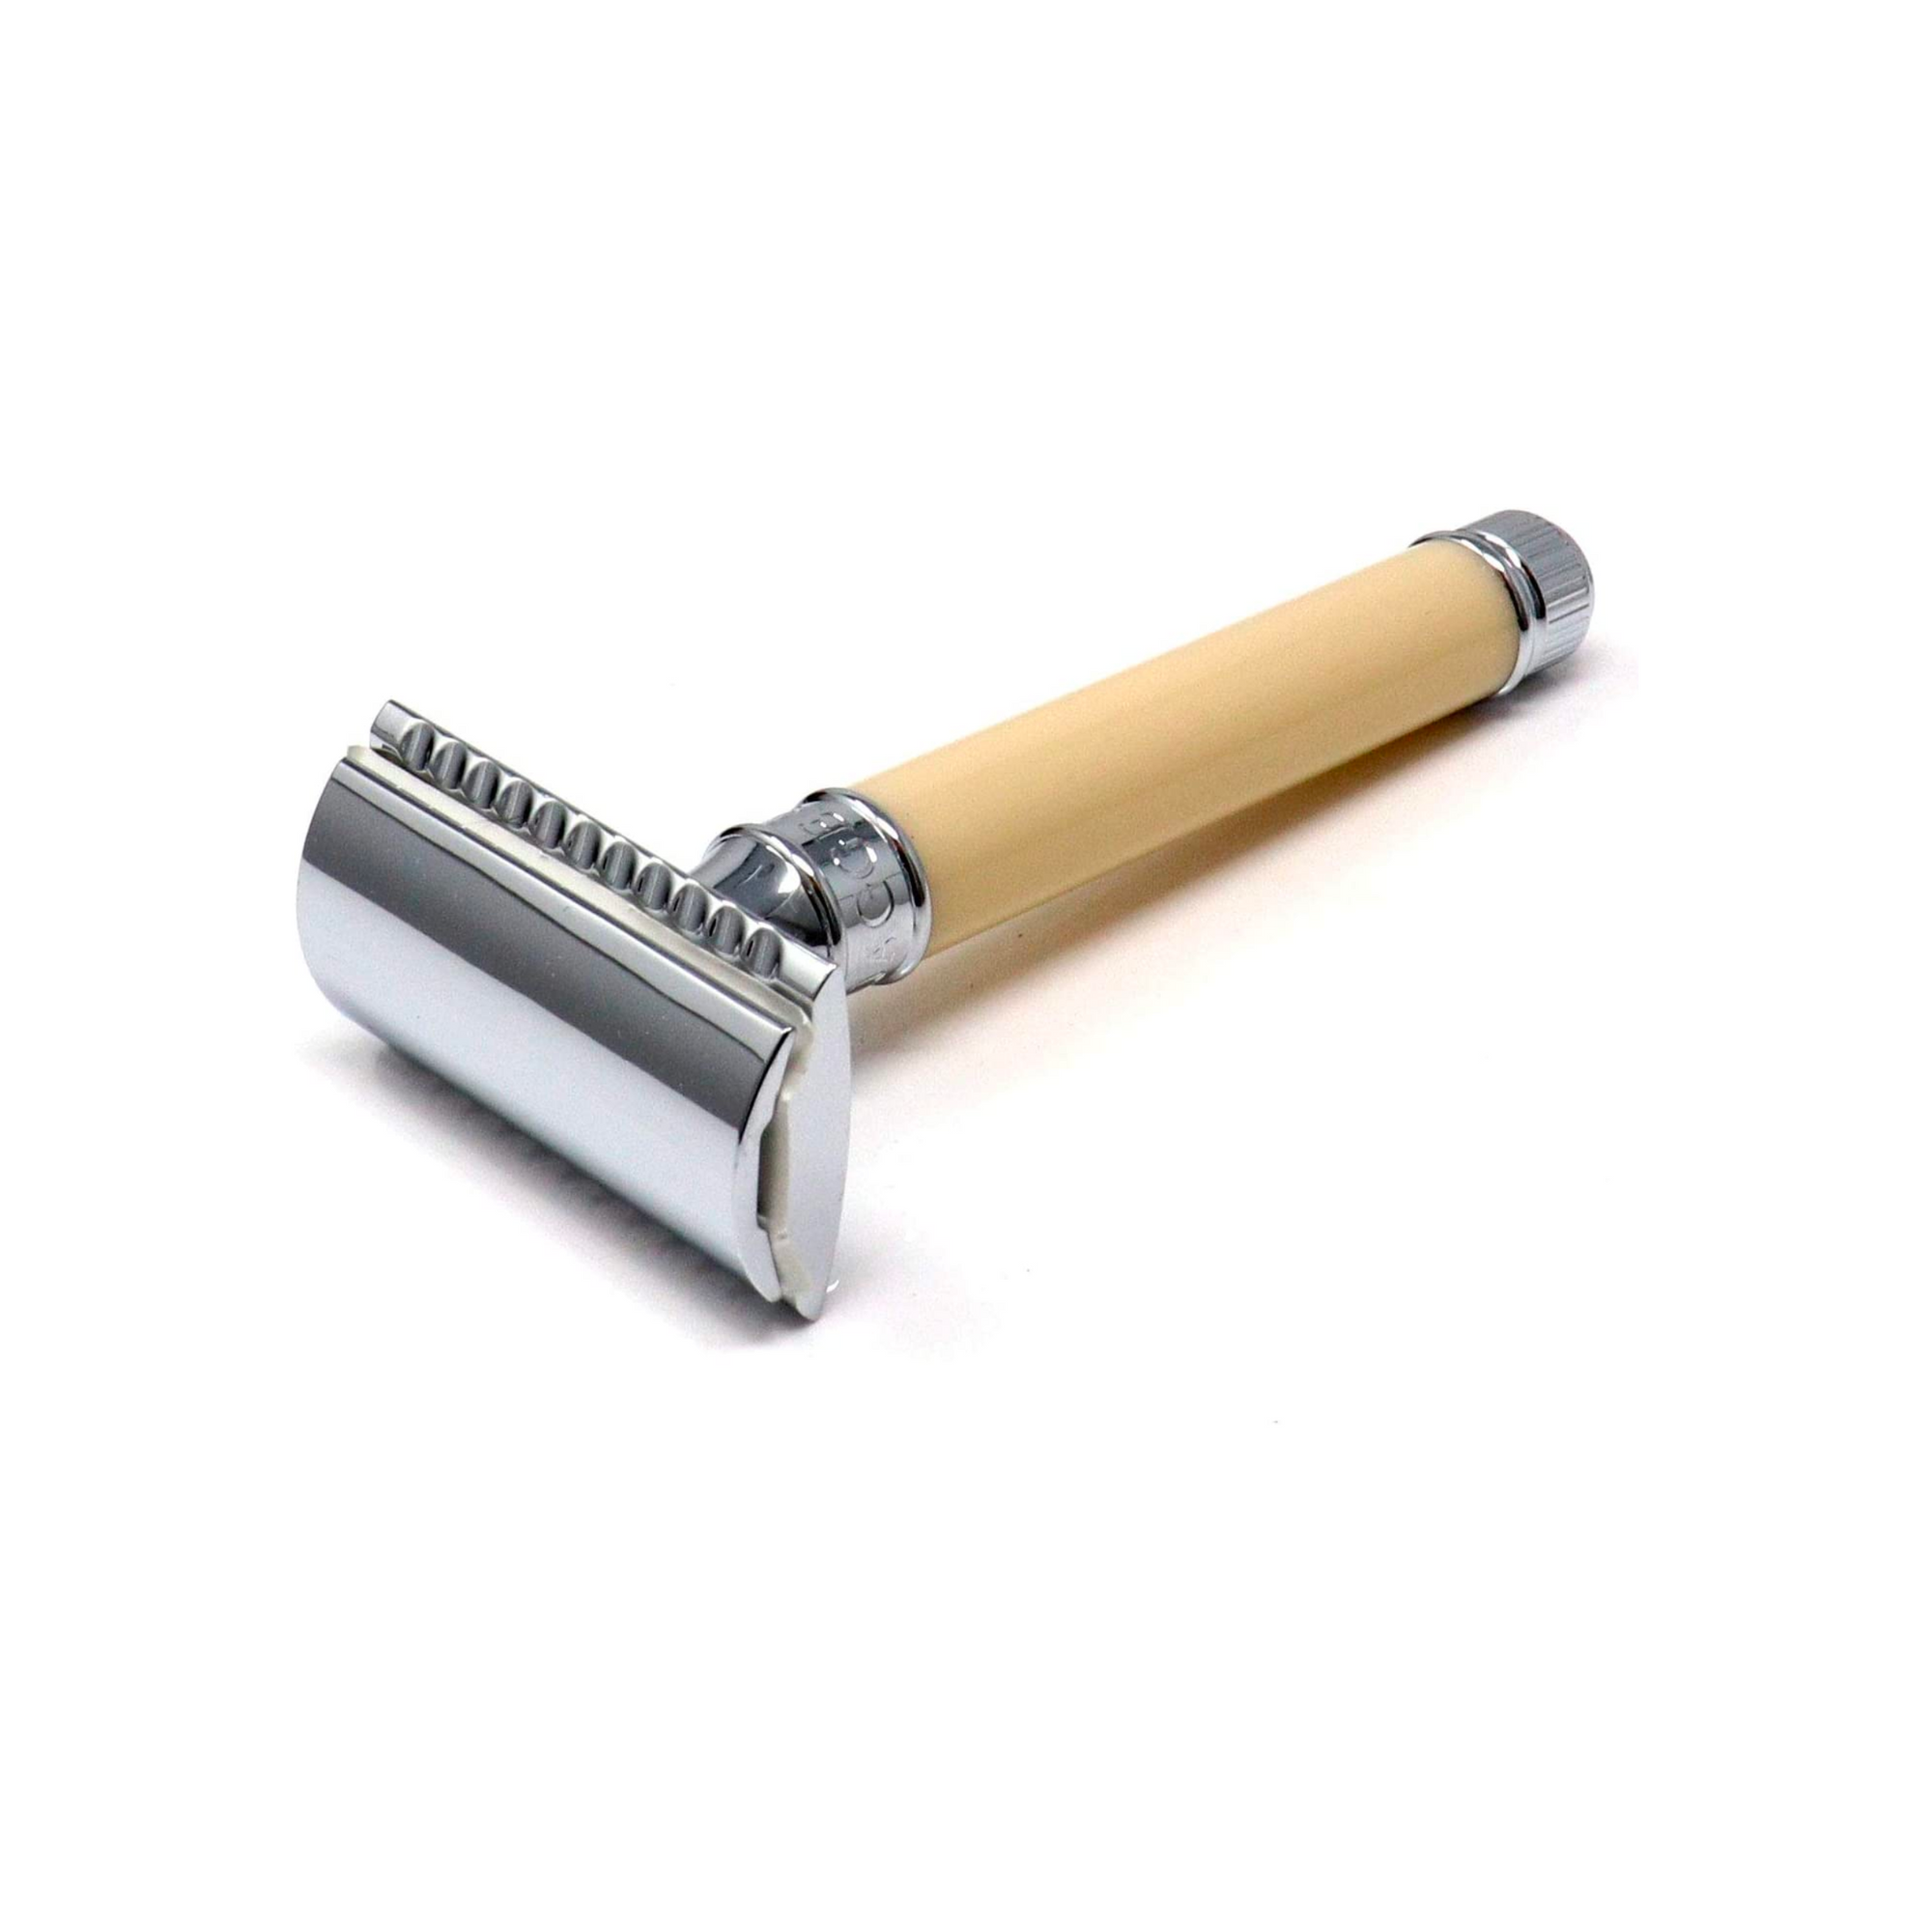 Edwin Jagger DE Safety Razor, Extra Long' Handle, Ivory. Shaving and grooming, Revolucion Lifestyles, mens gifts and lifestyle store in Vancouver.